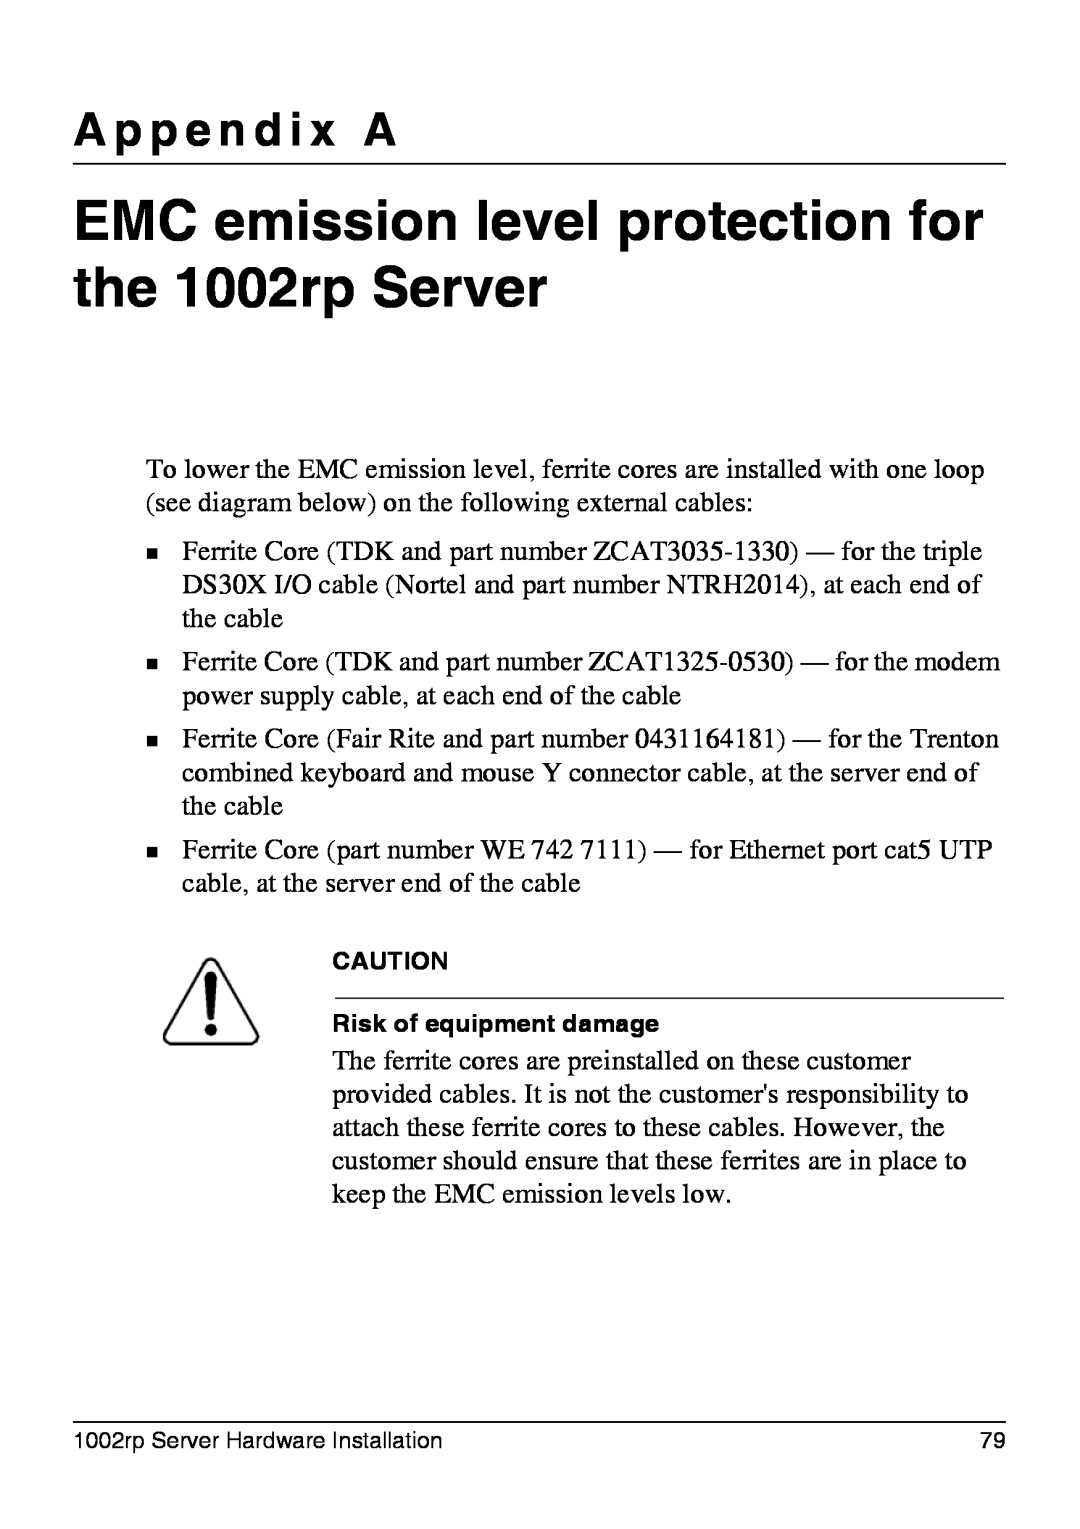 Nortel Networks manual EMC emission level protection for the 1002rp Server, A p p e n d i x A 